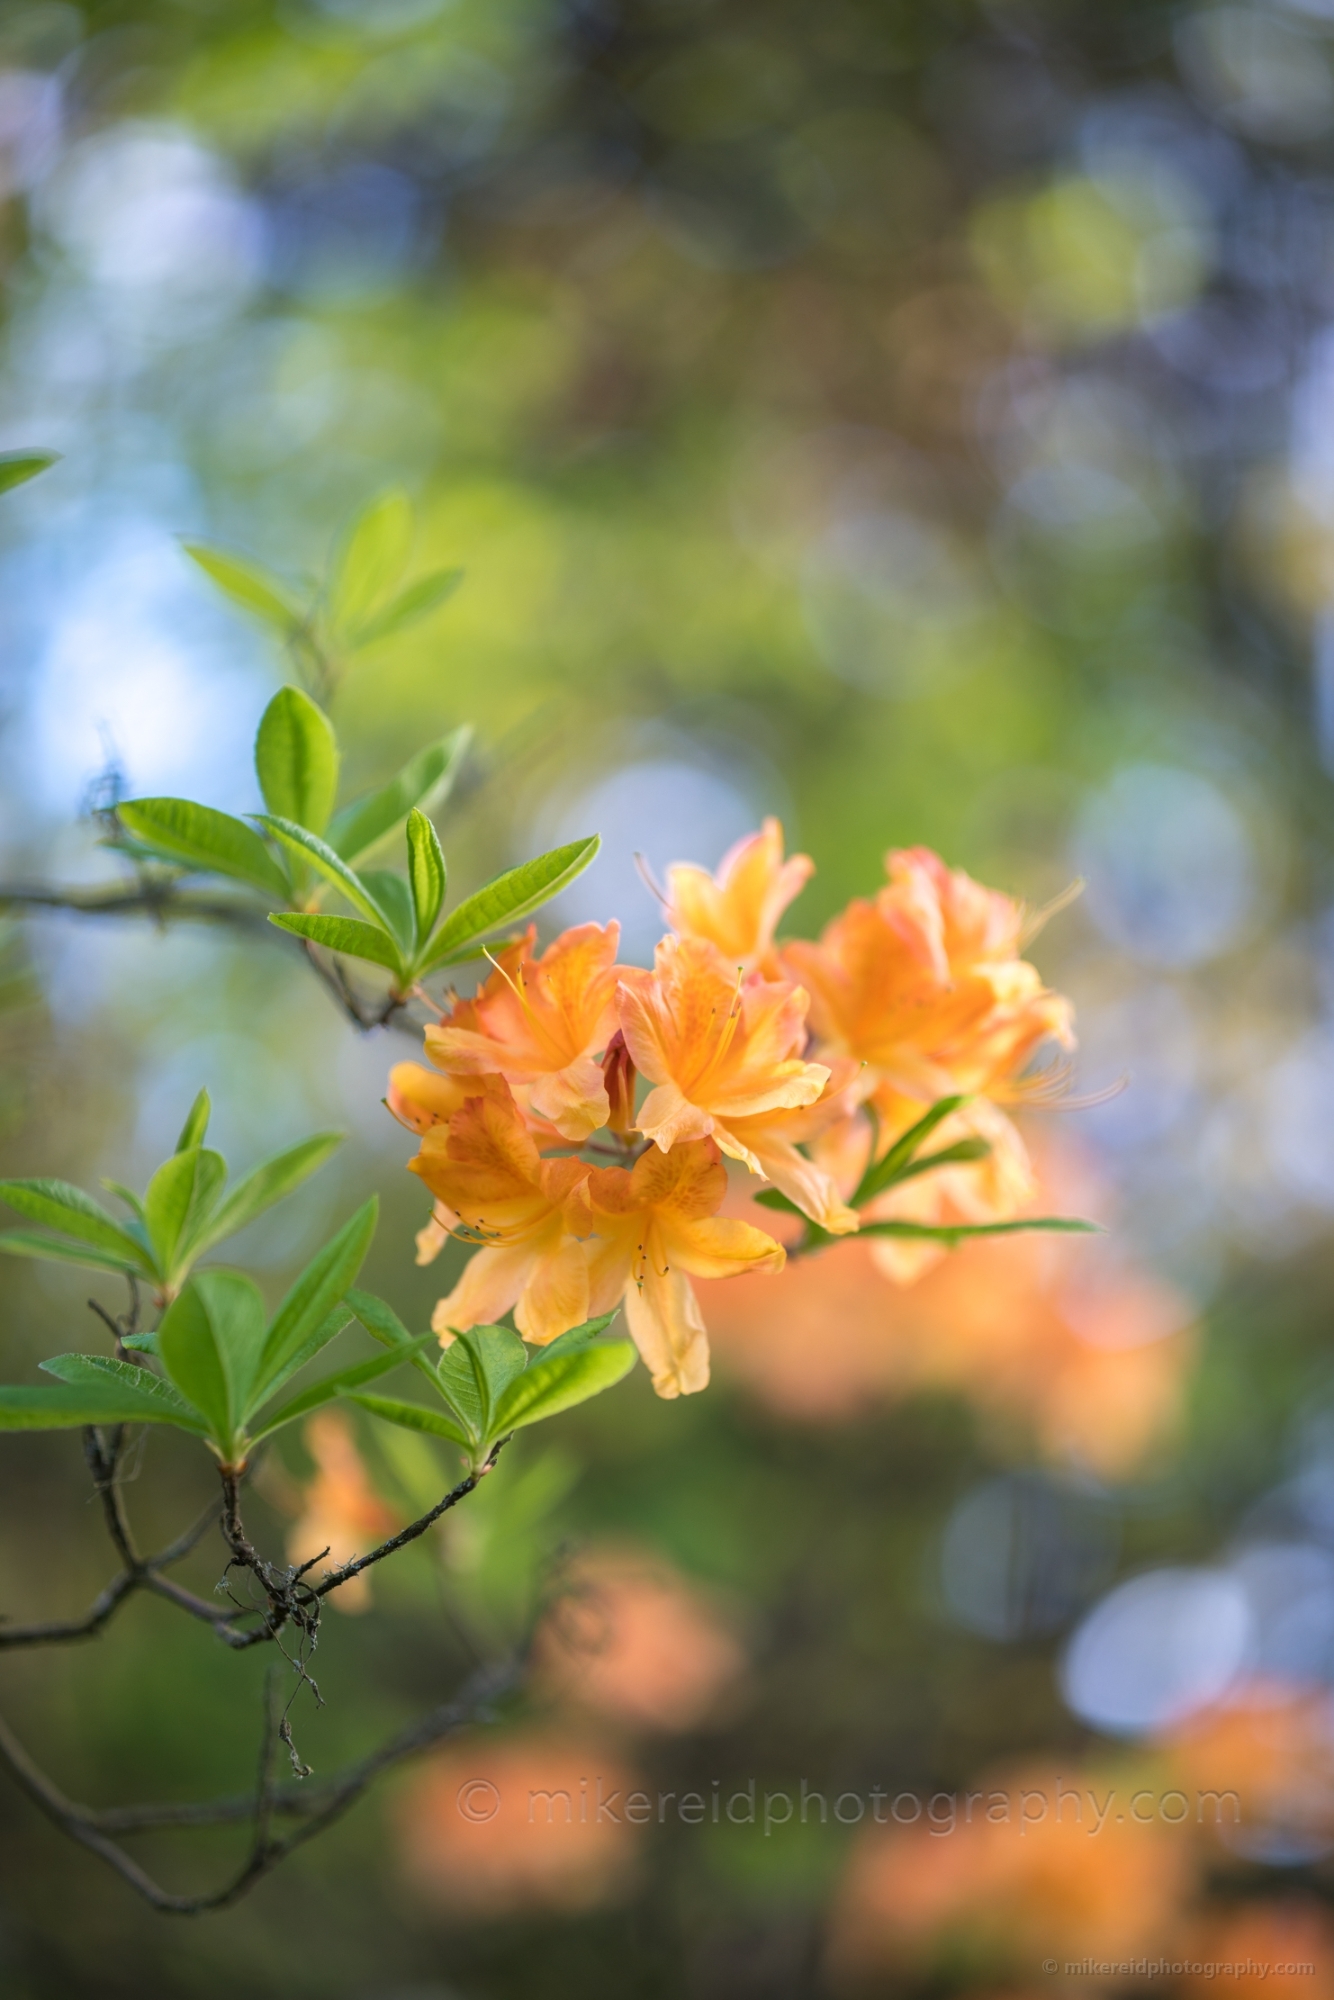 Rhododendron and Azaleas Photography Yellow Blooms Details